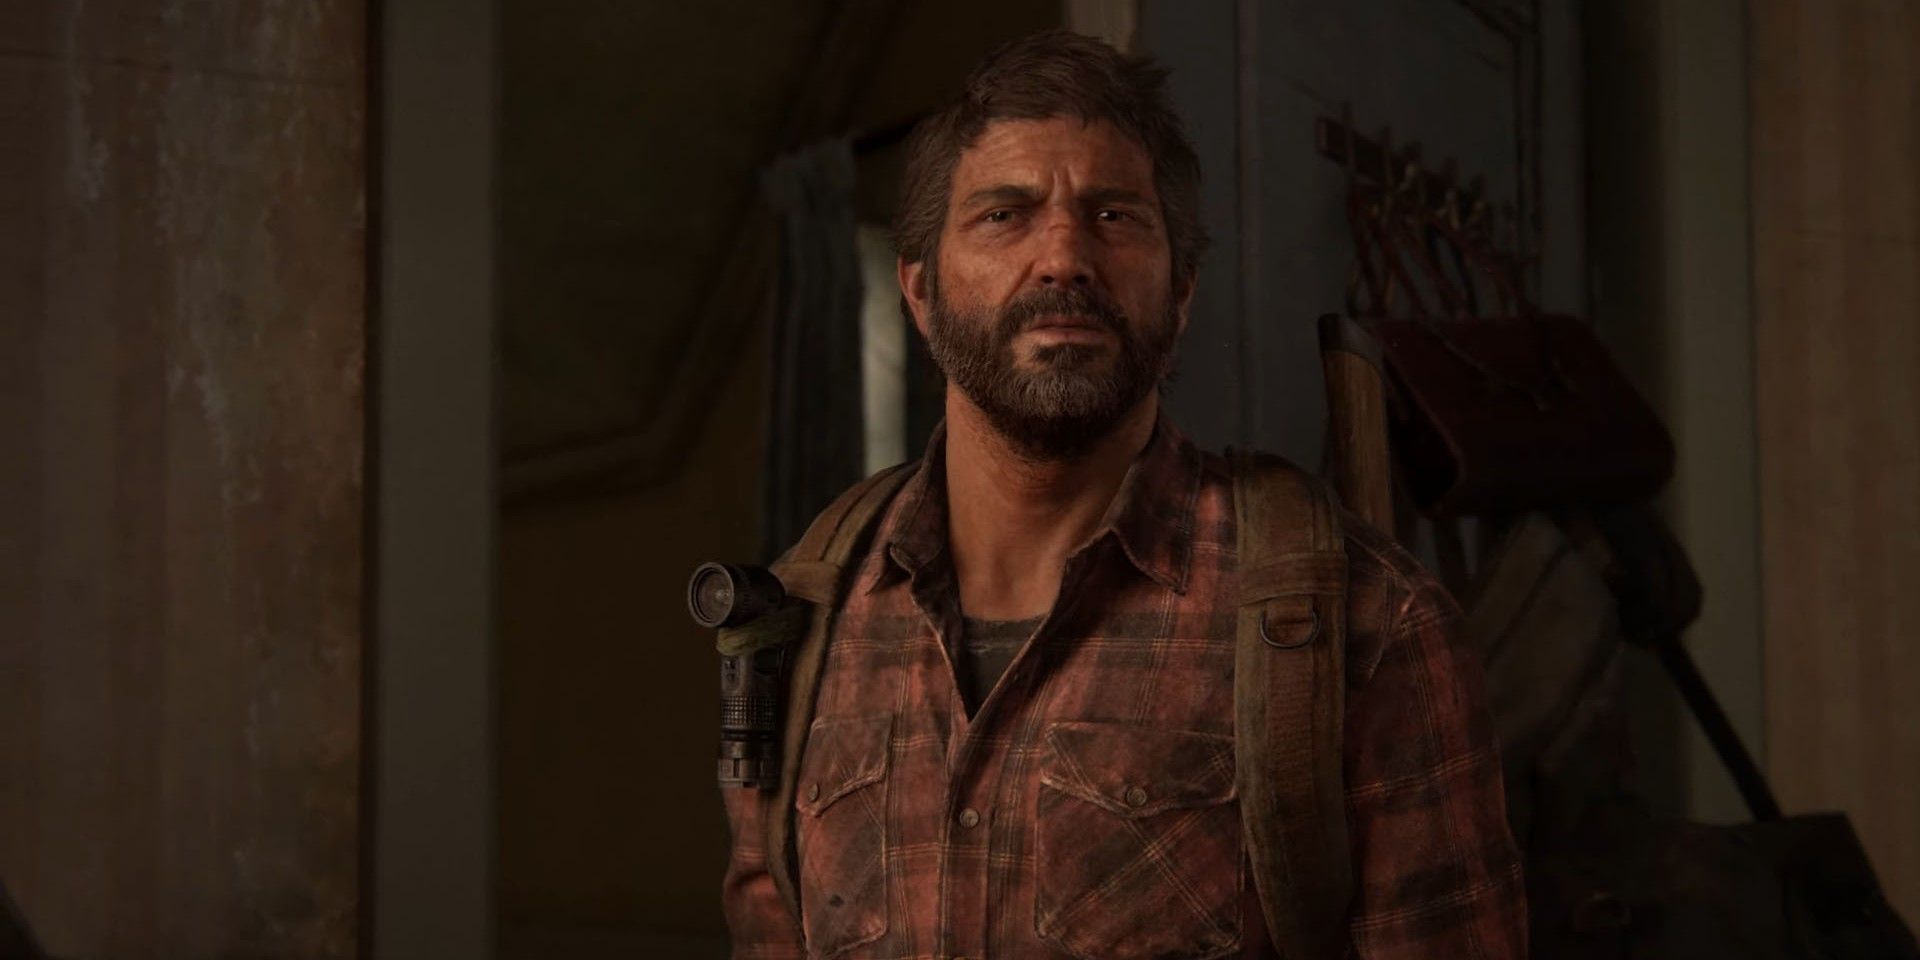 The Last of Us' Joel looks blankly ahead with a door behind him.